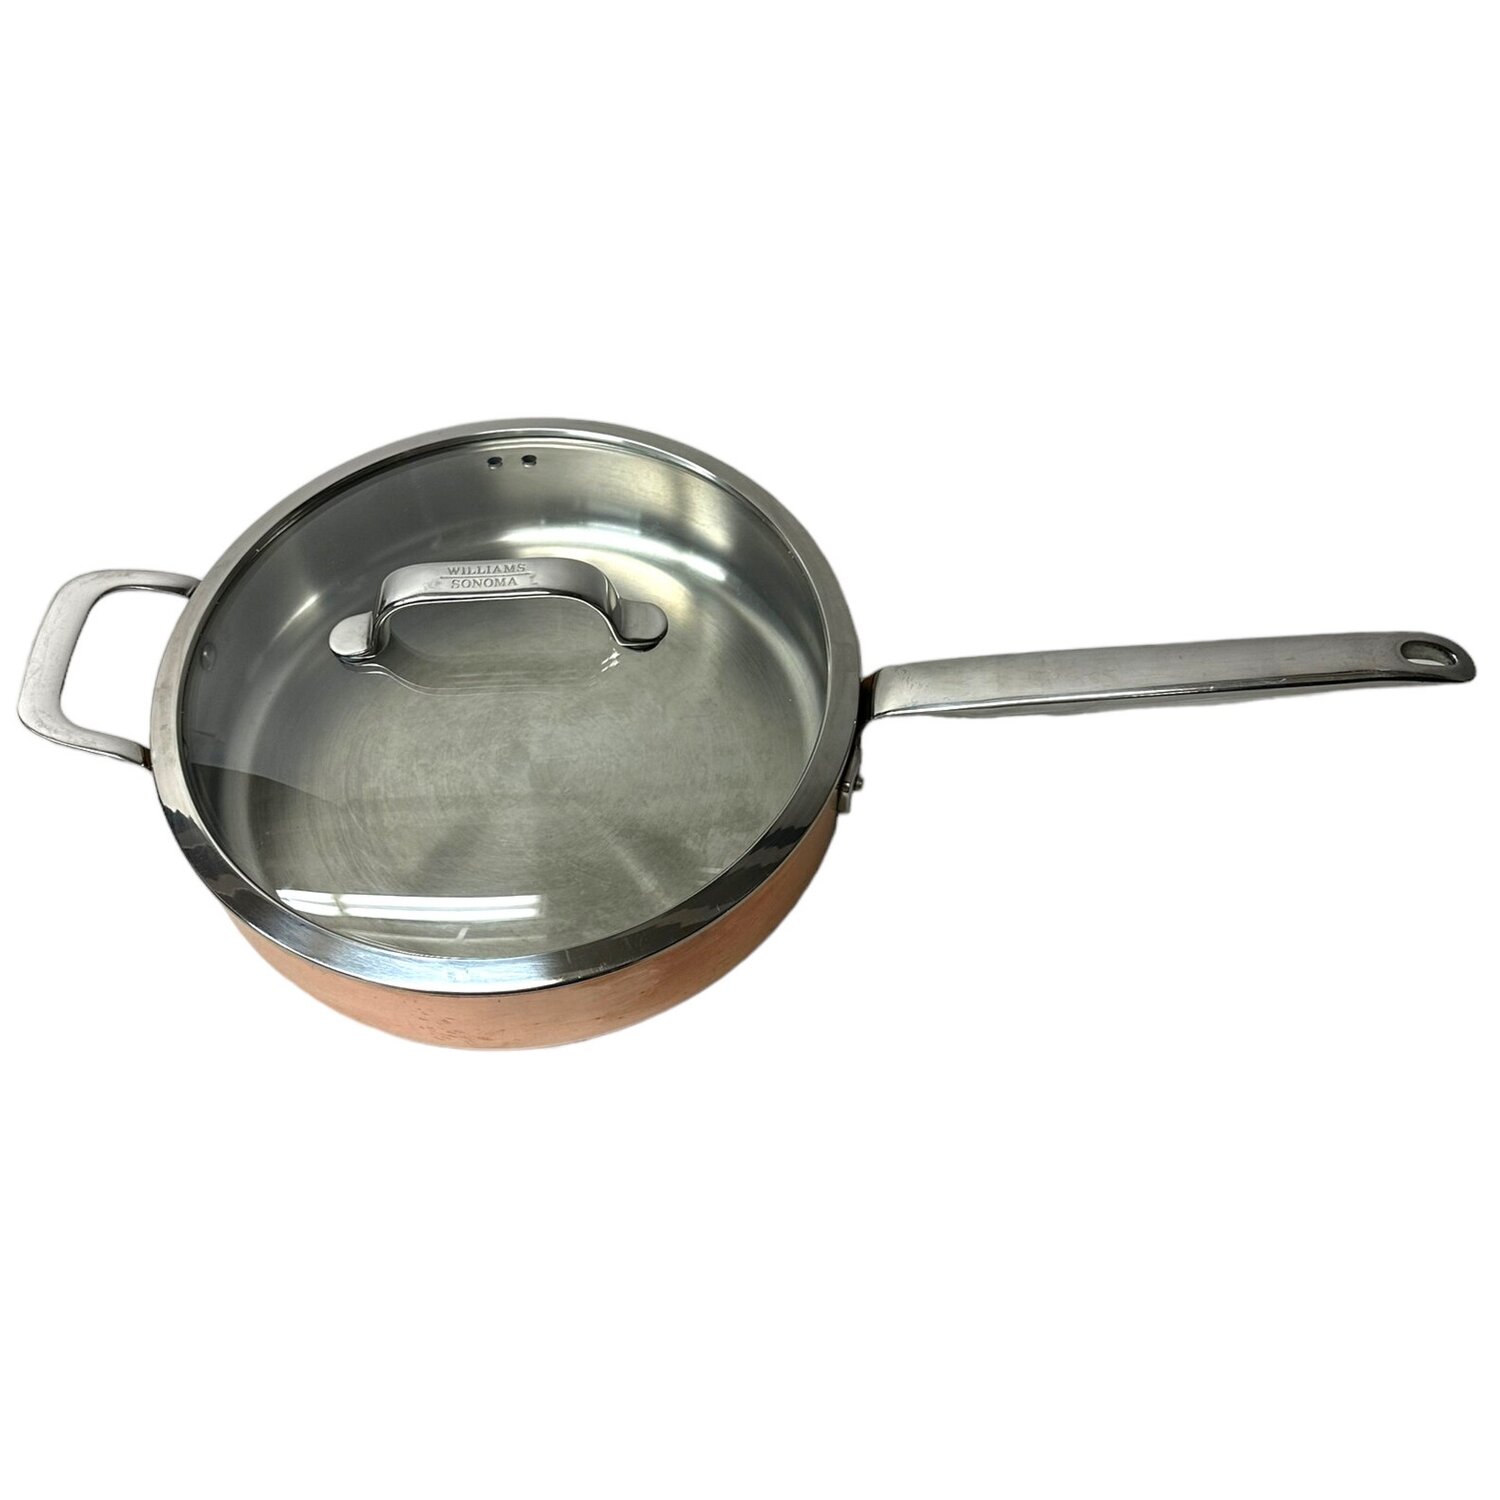 William Sonoma Copper Clad 10 Fry pan and large sauce pot with